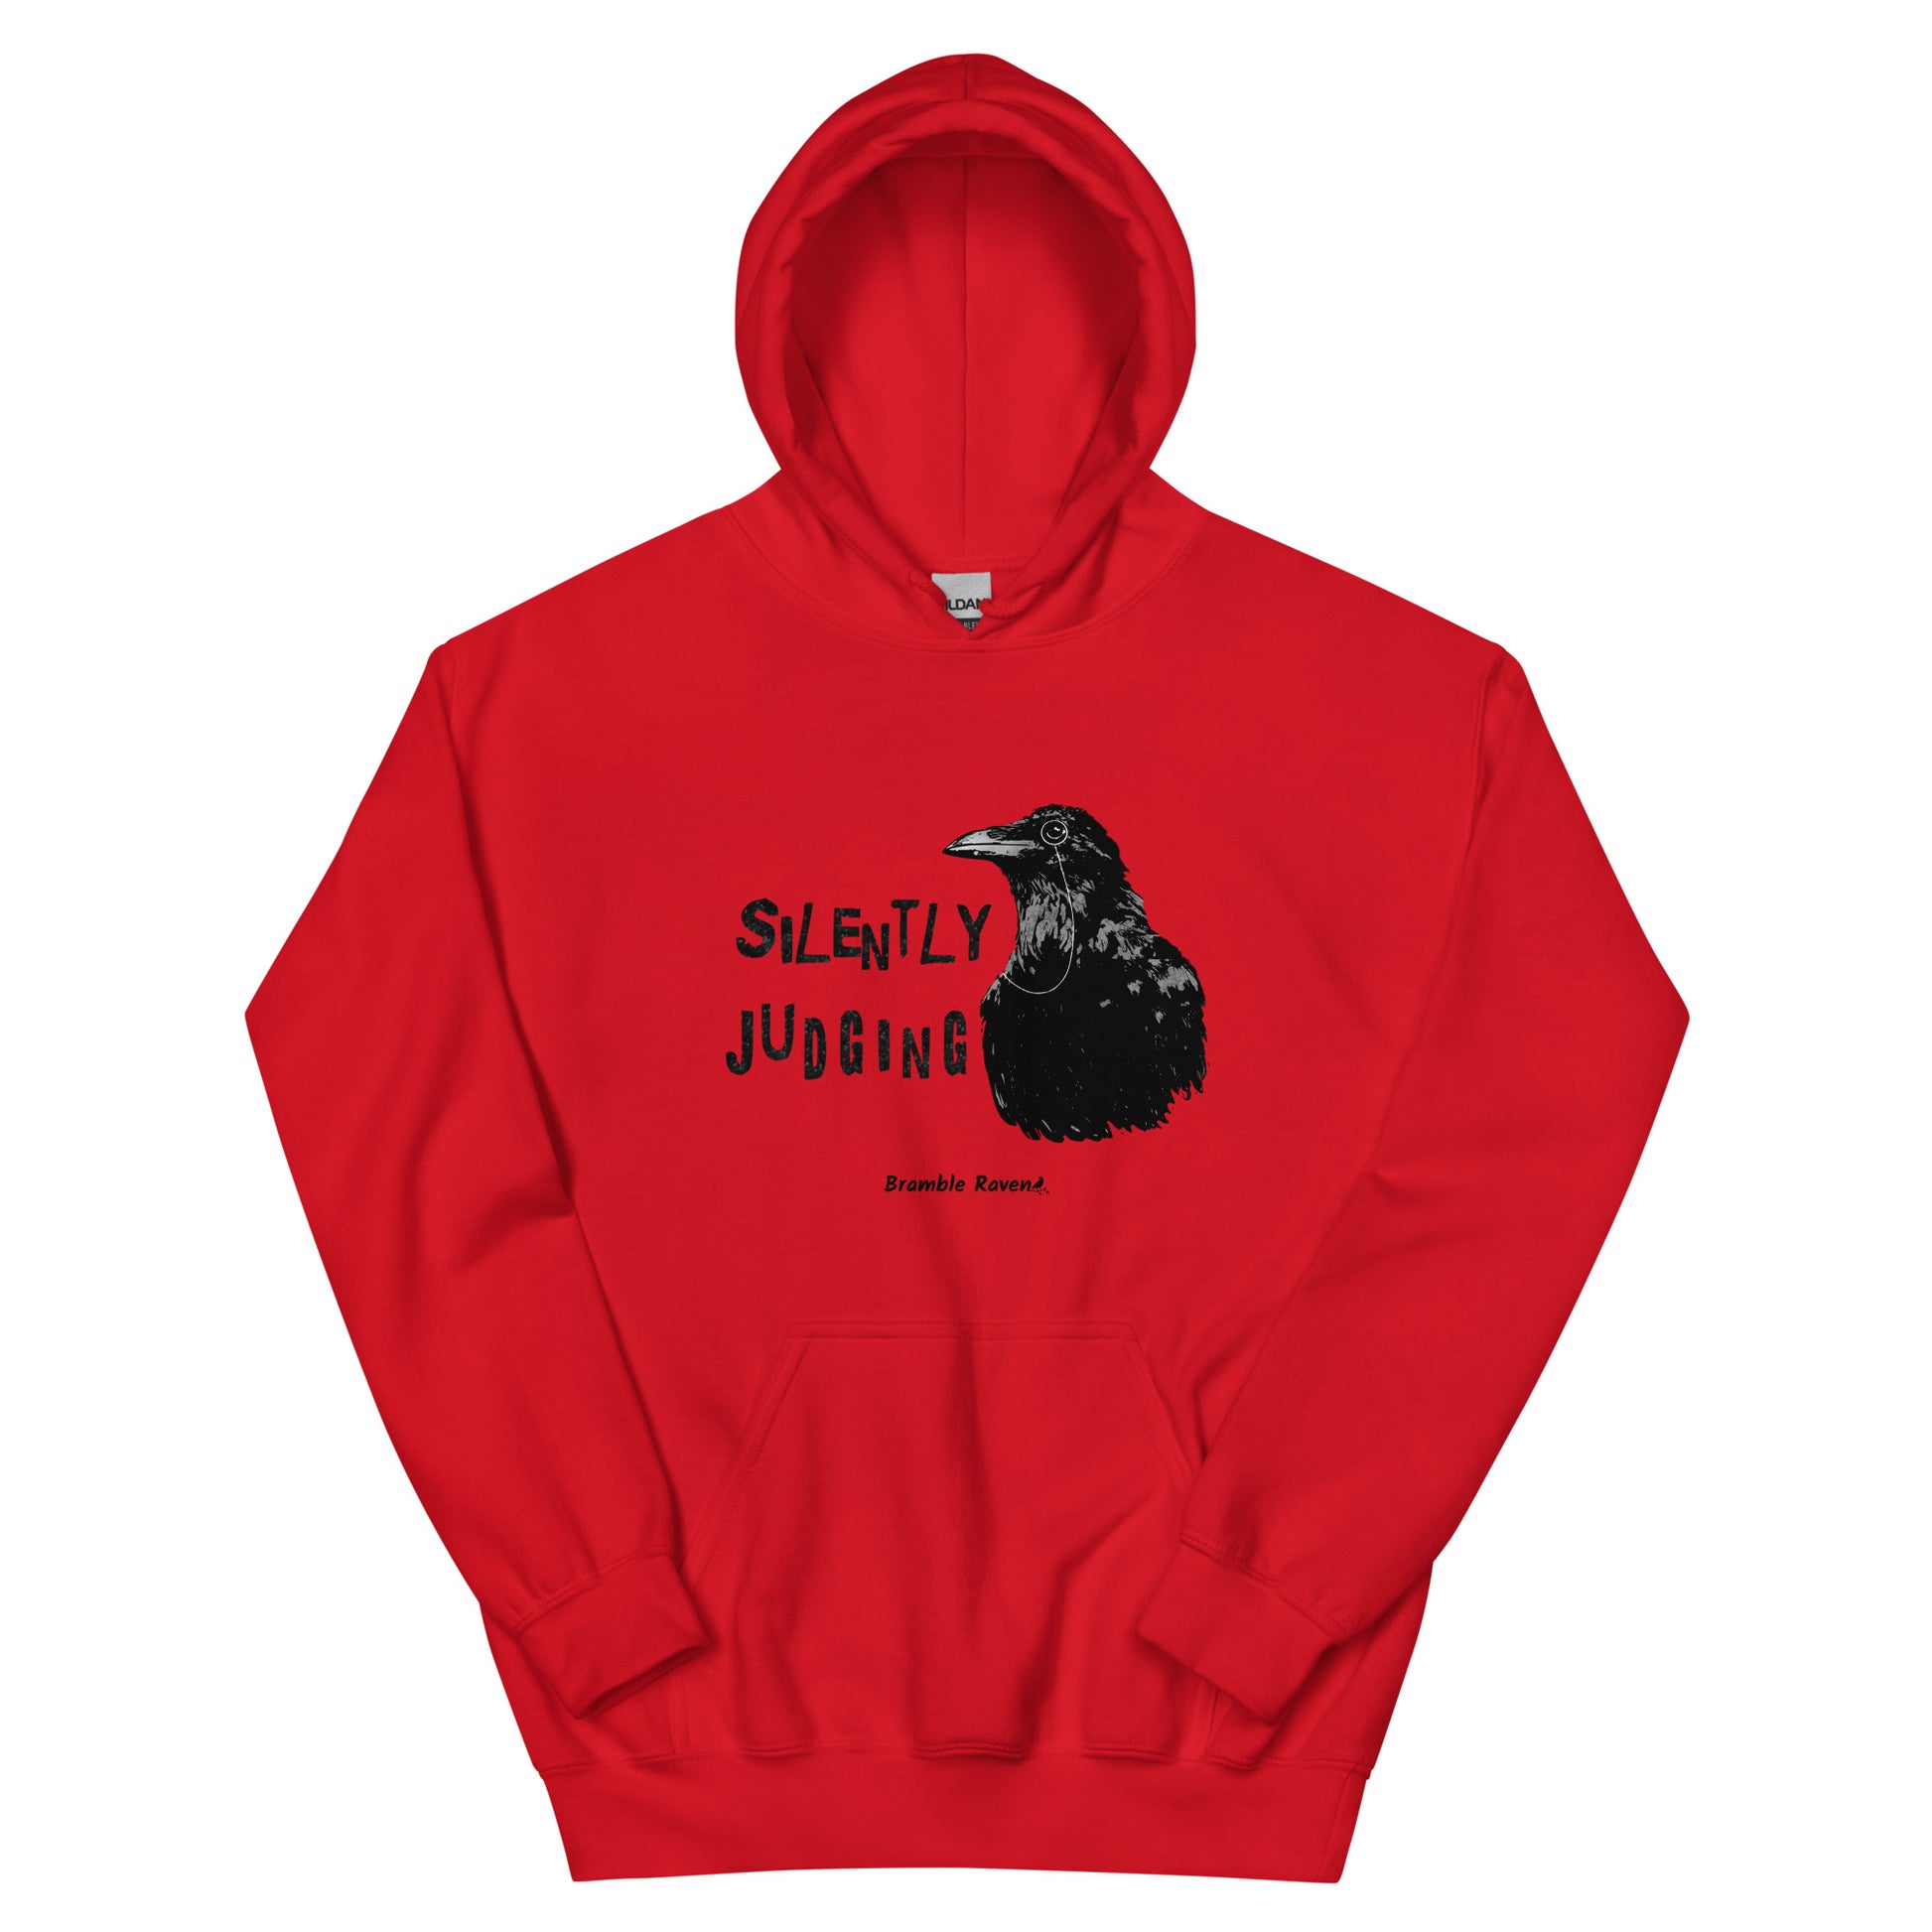 Unisex red colored hoodie with horizontal design of silently judging text by black crow wearing a monocle.  Design on the front of hoodie. Features double-lined hood and front pouch pocket.